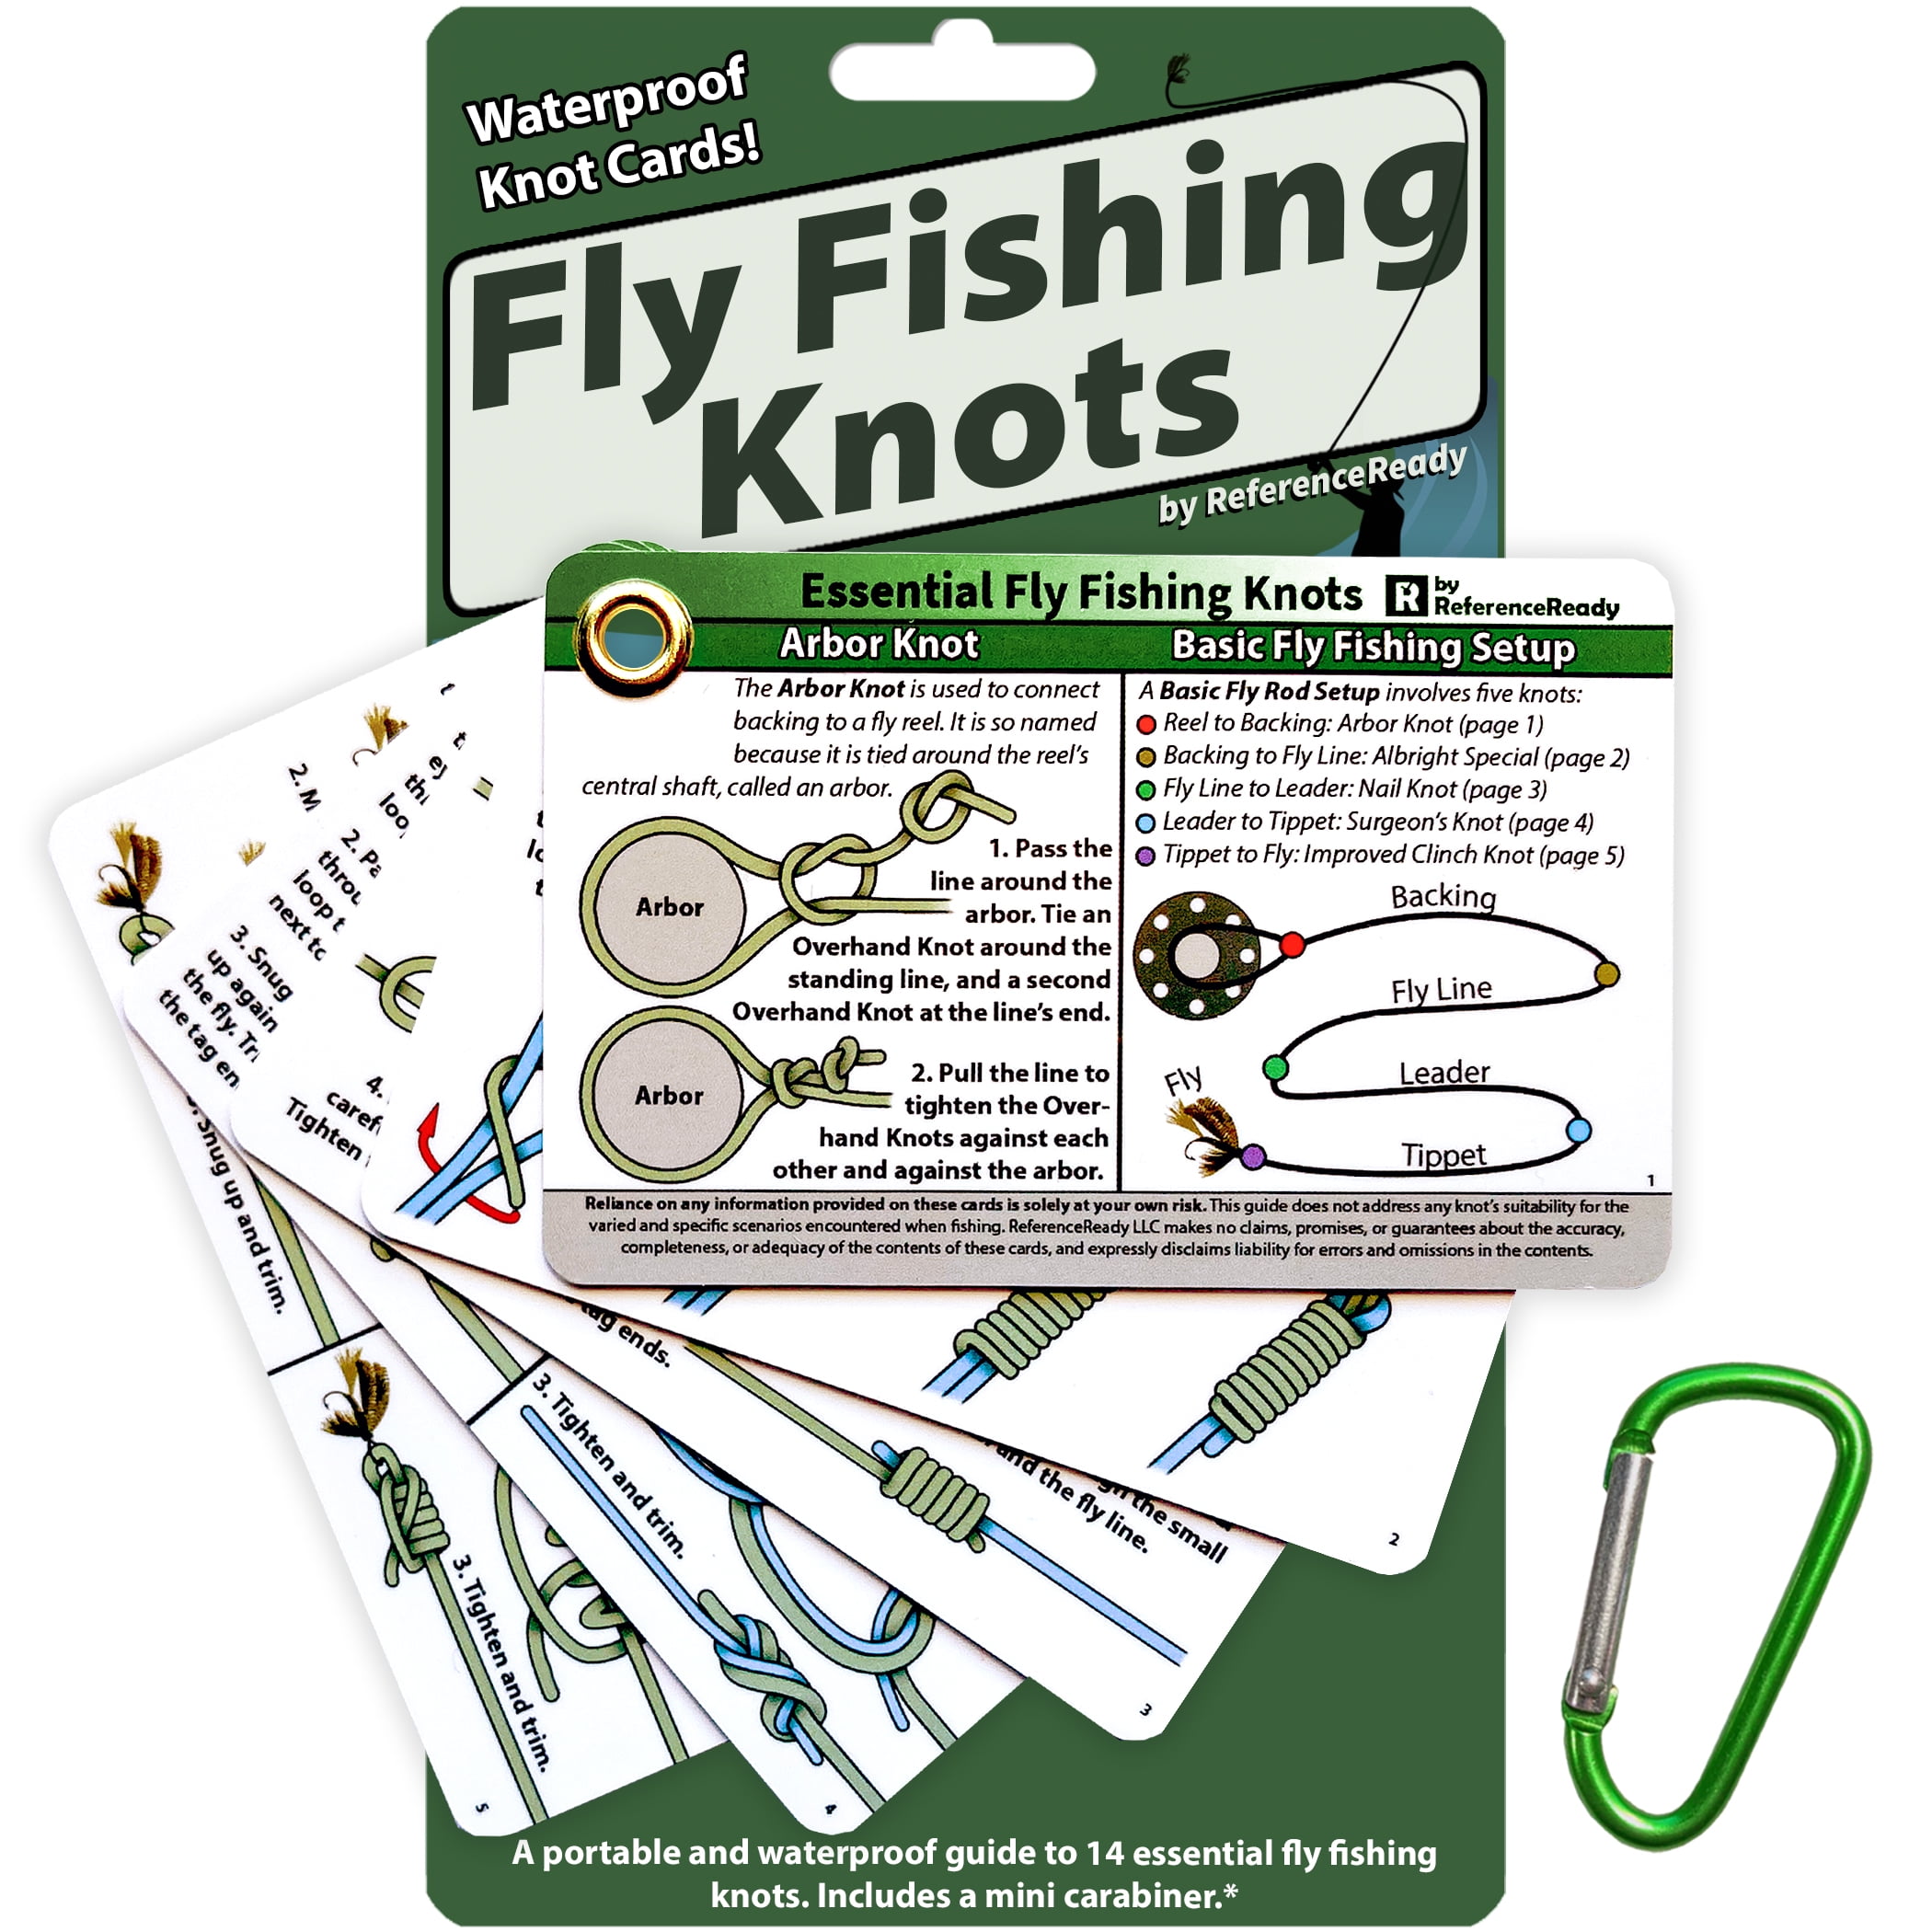 Essential Fly Fishing Knots - Waterproof Guide to Fly Fishing Knots